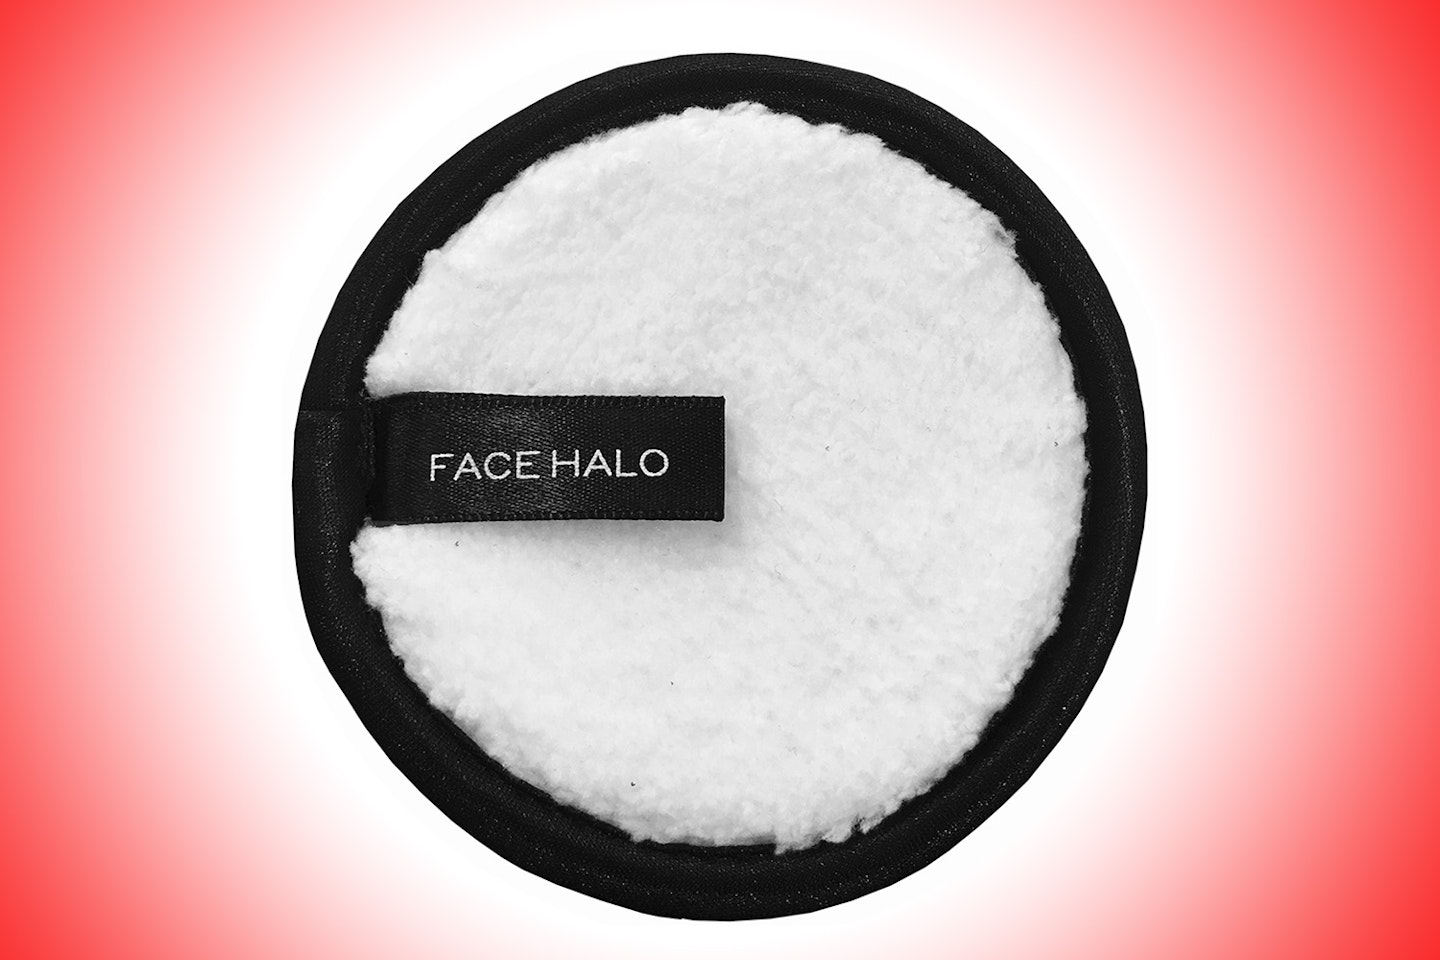 The Face Halo